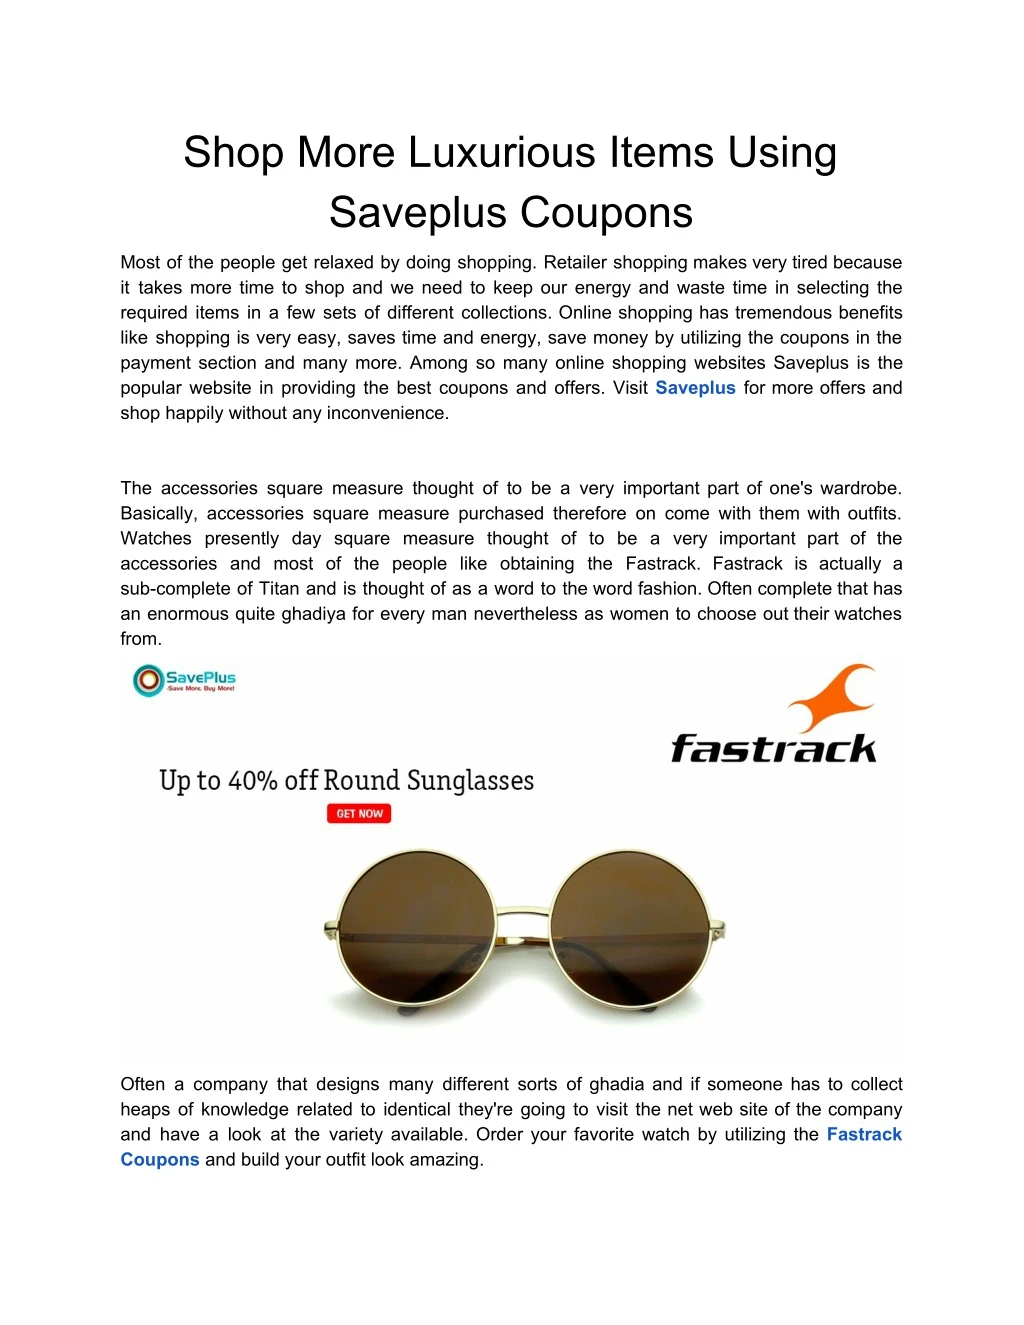 shop more luxurious items using saveplus coupons